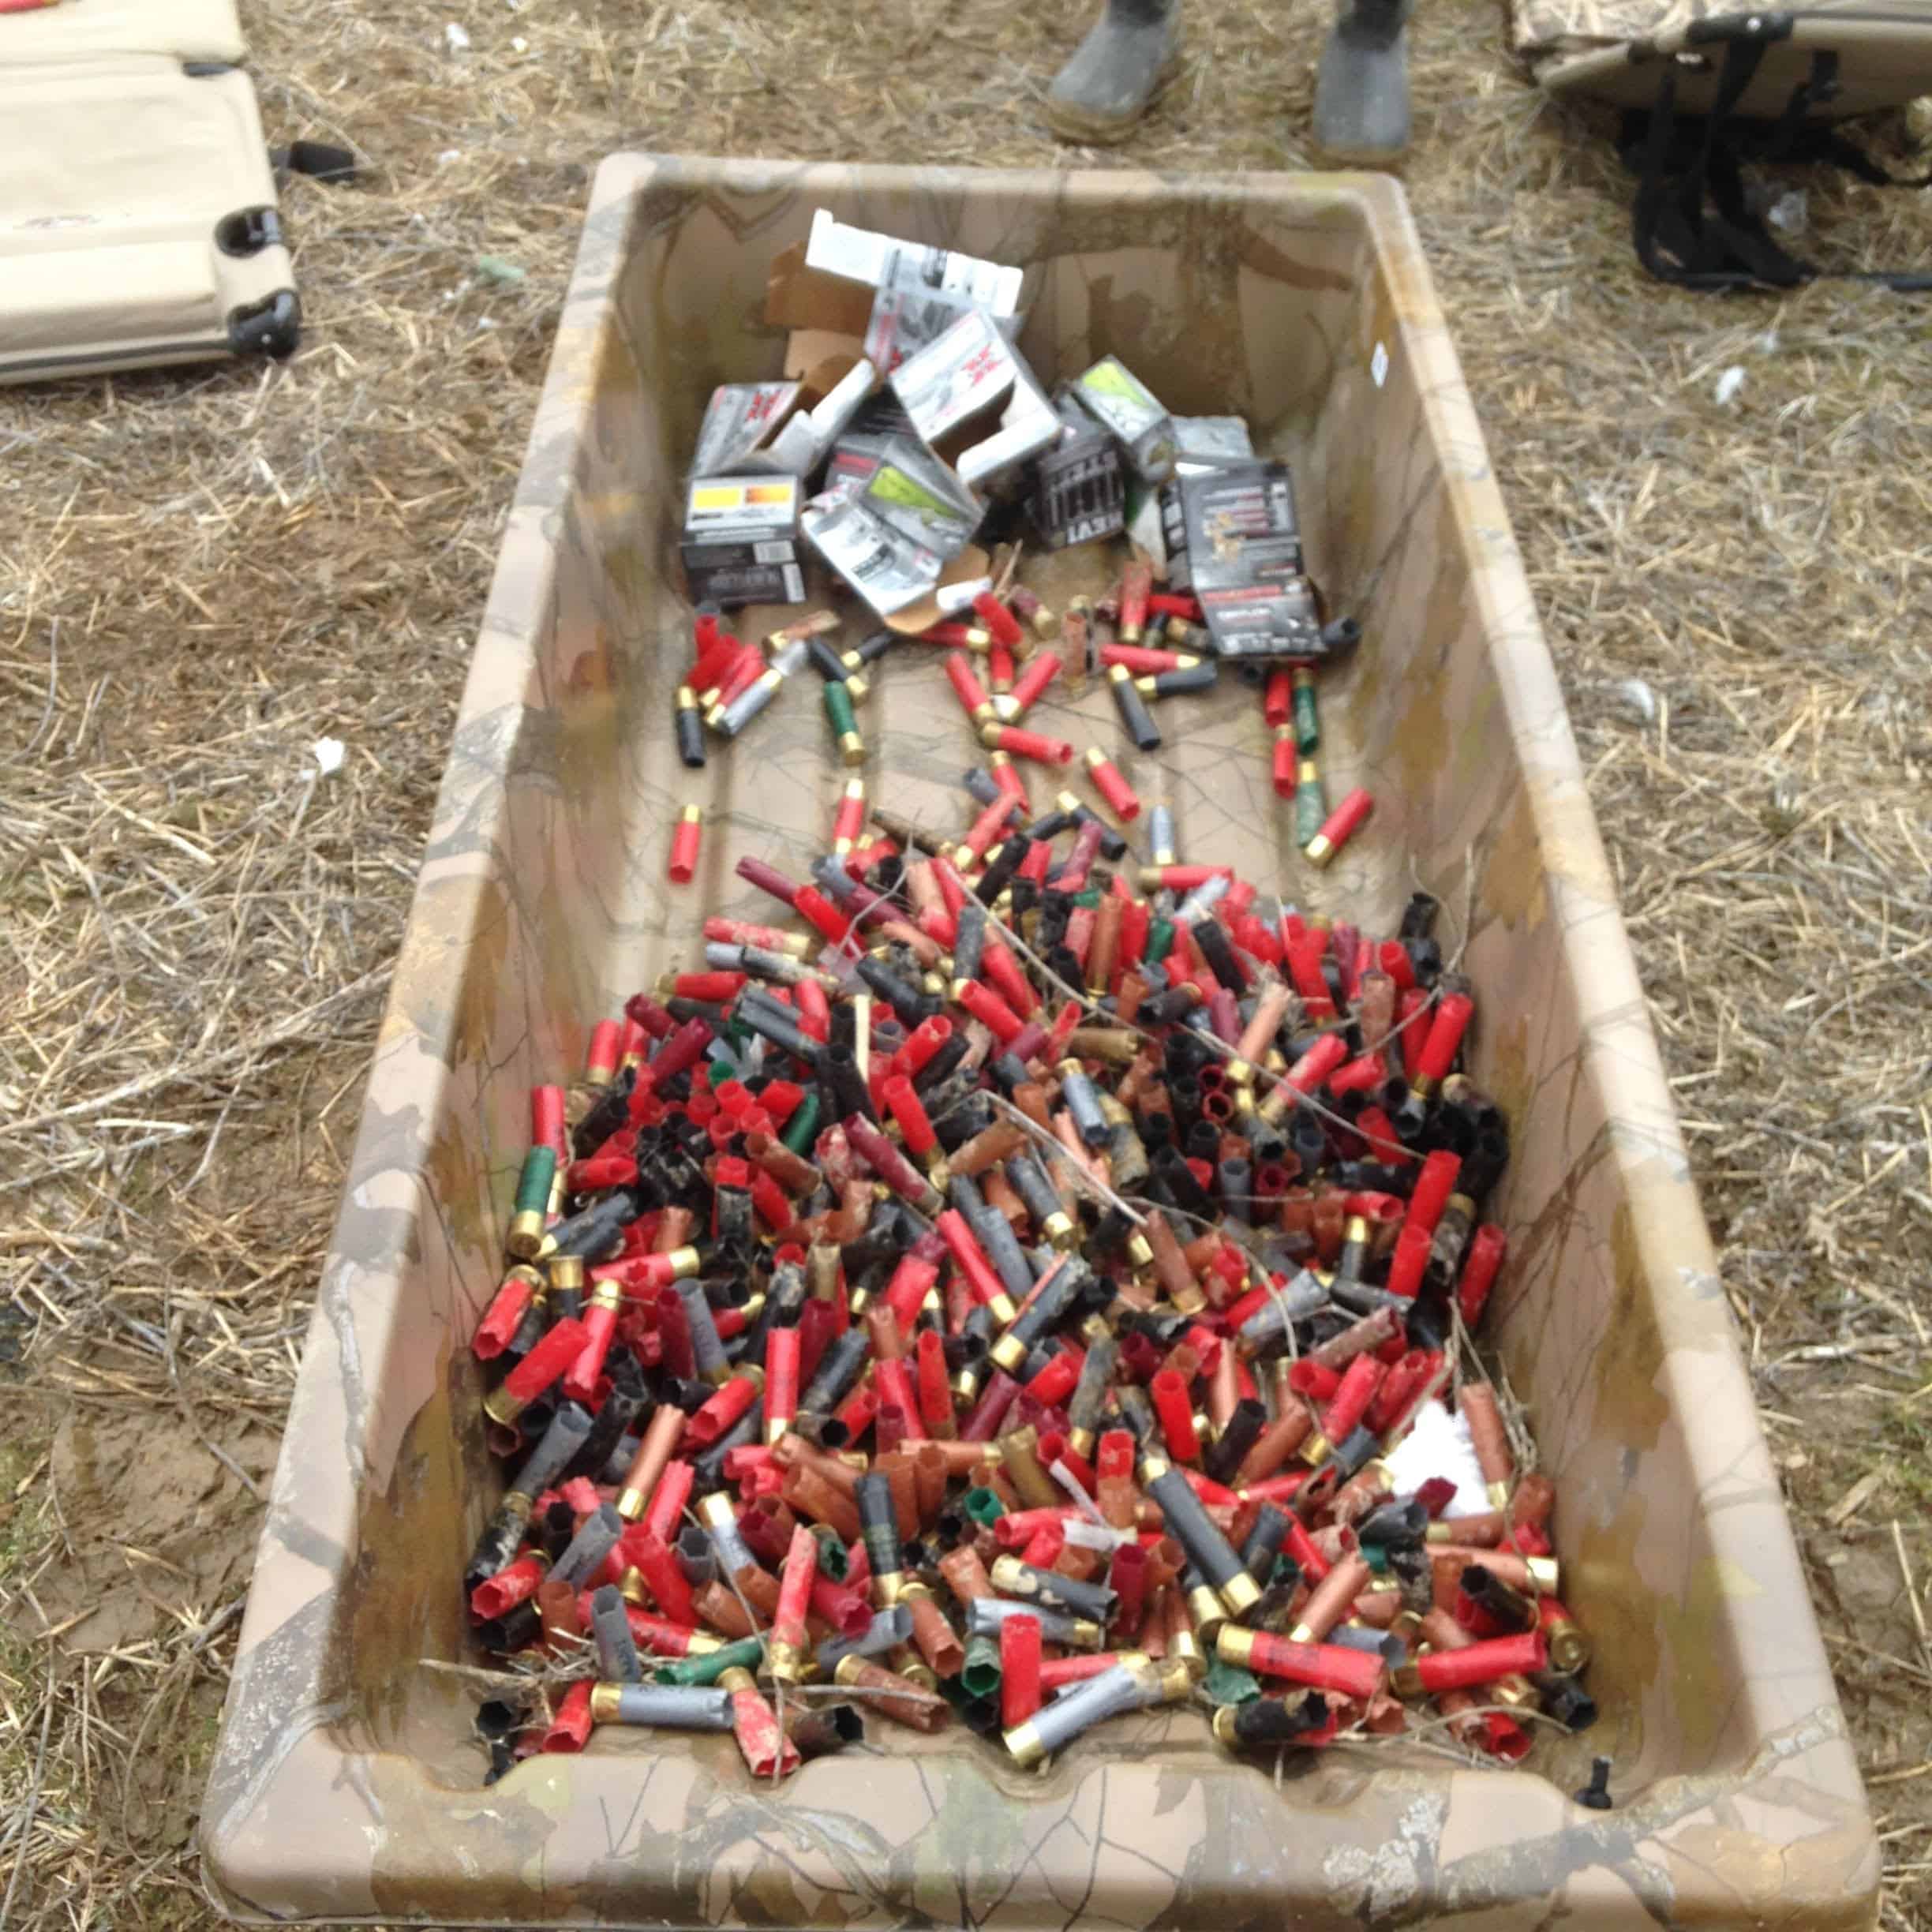 Spent Shell Casings after Snow Goose Hunt